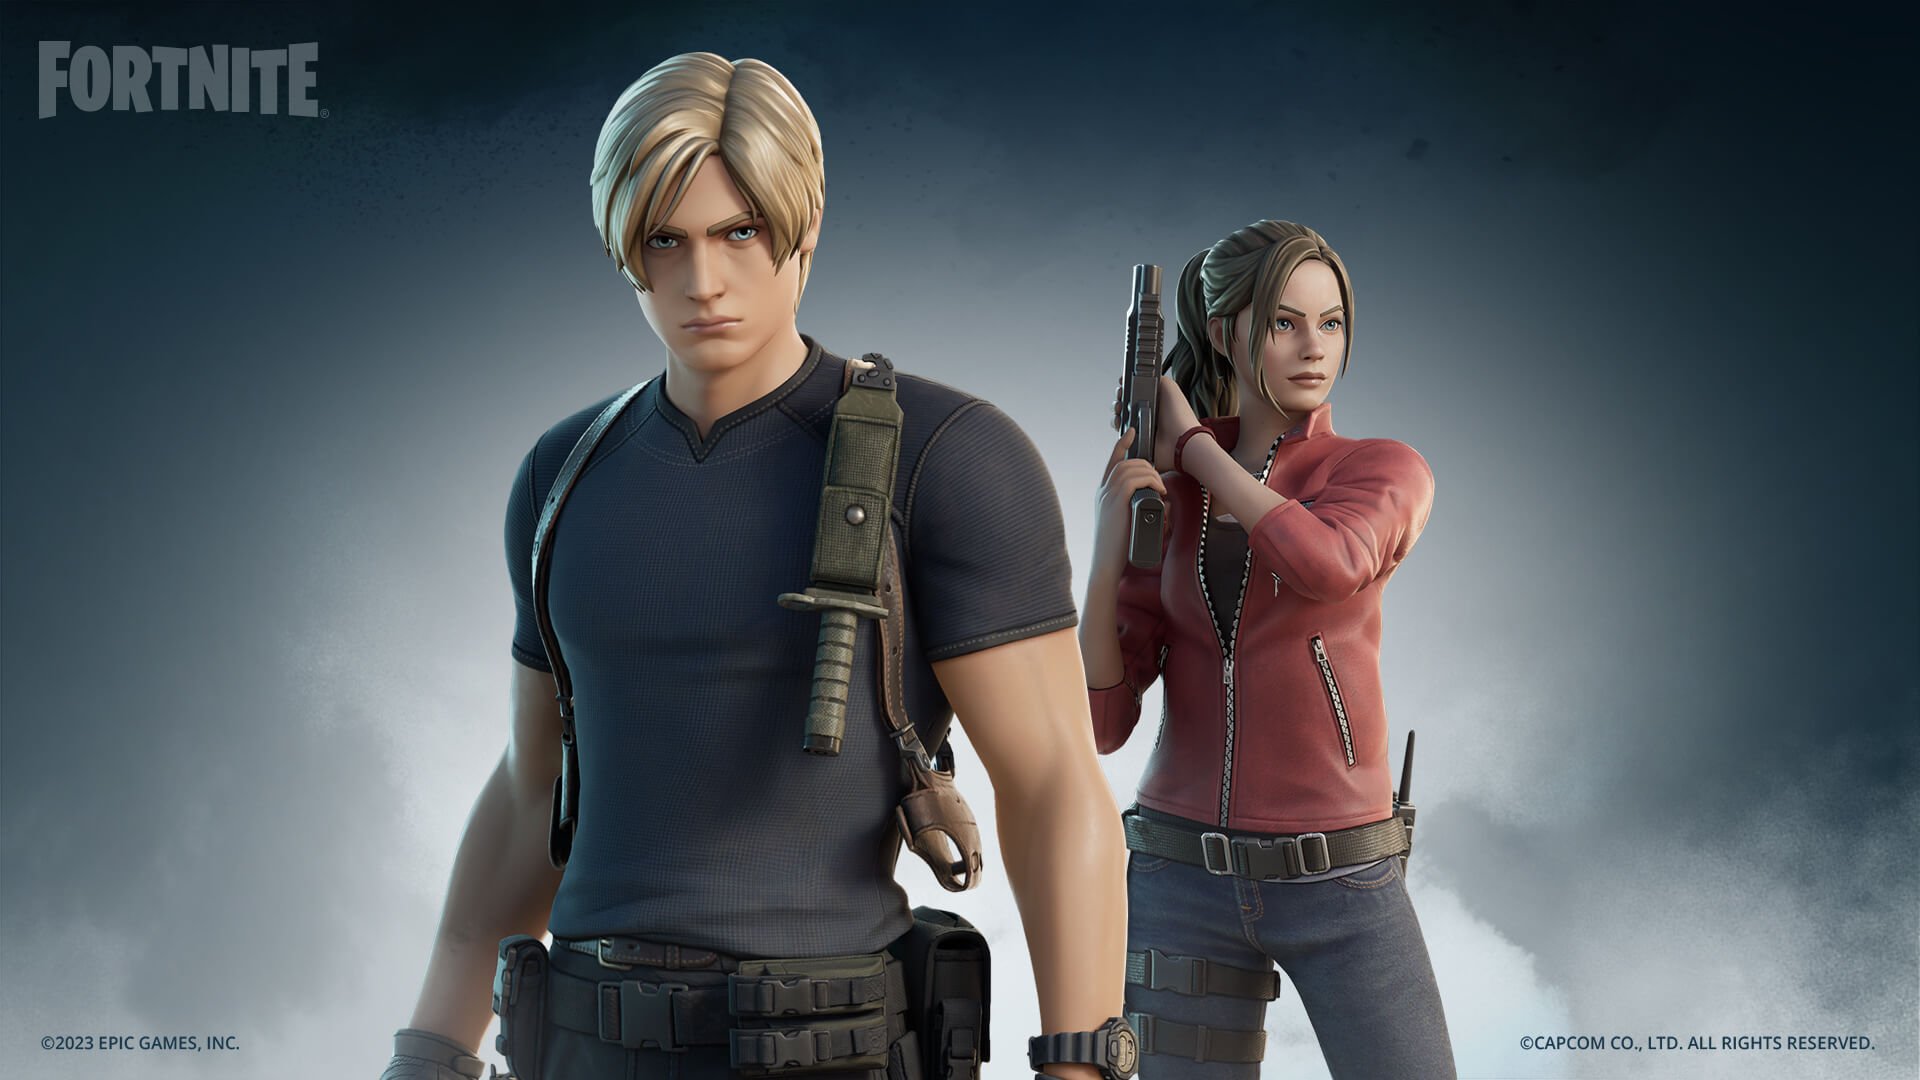 Fortnite skins - Leon and Claire skins in the style of their Resident Evil 4 Remake and Resident Evil 2 Remake styles respectively.